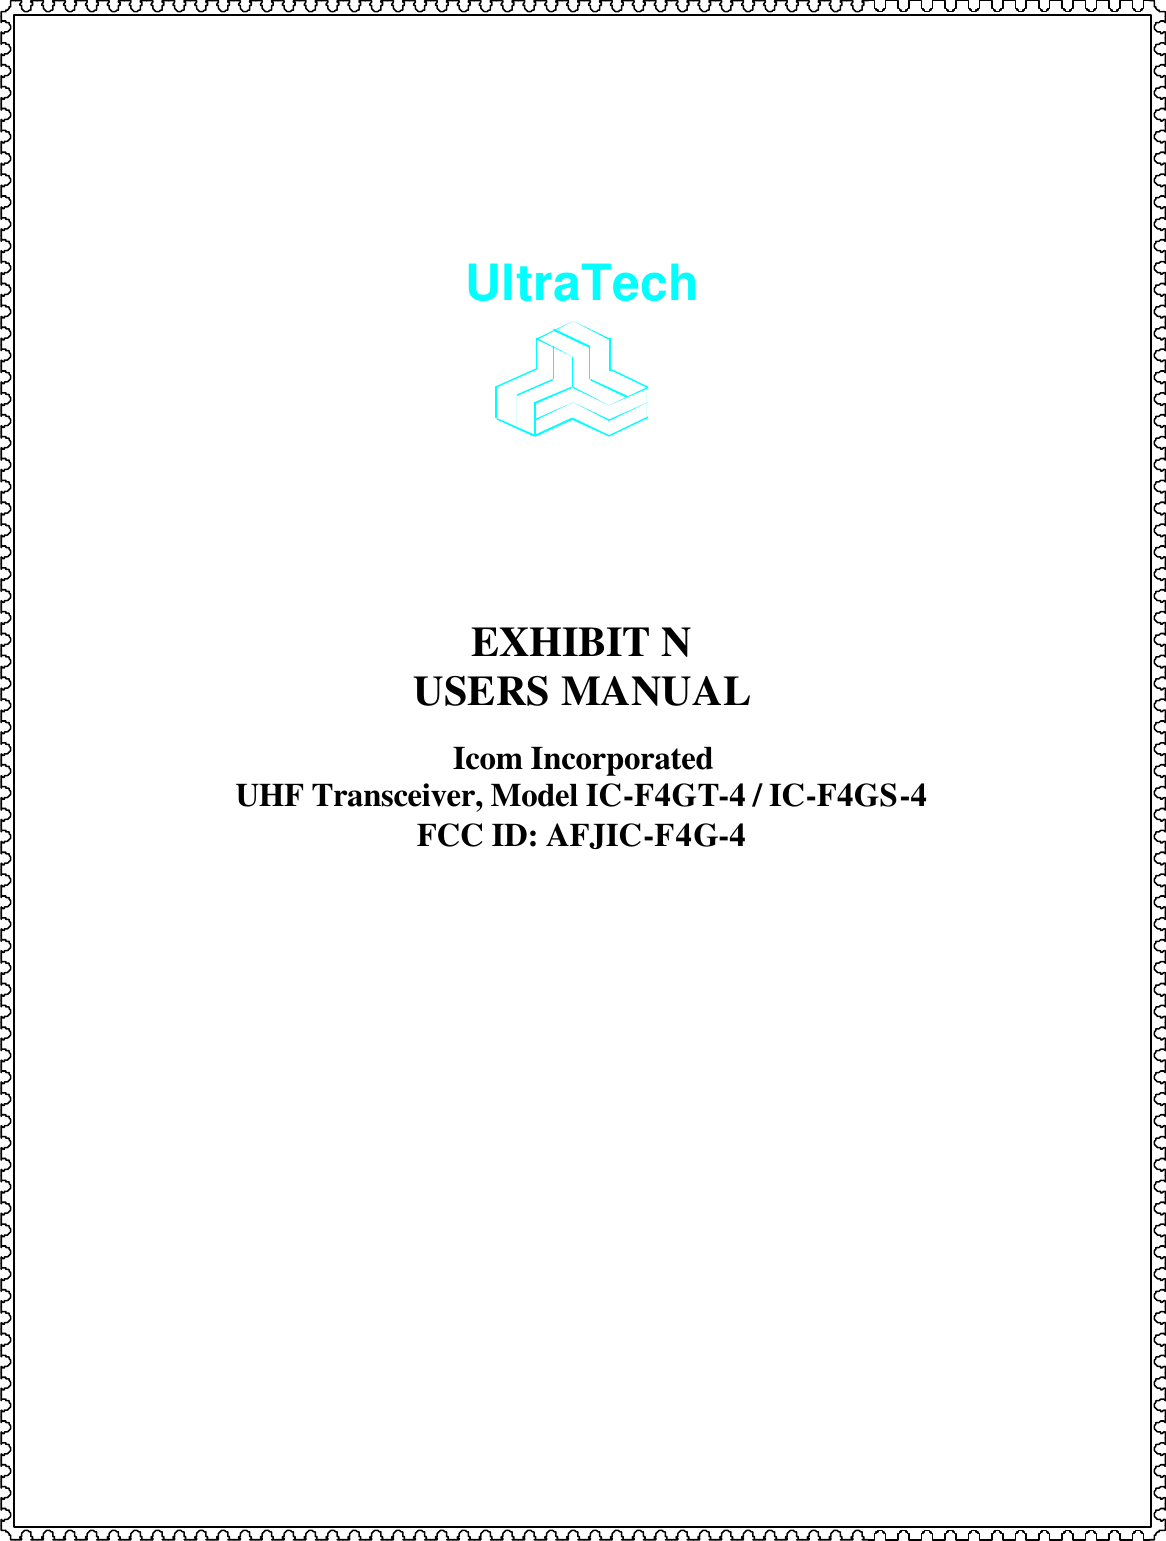       UltraTech         EXHIBIT N USERS MANUAL  Icom Incorporated UHF Transceiver, Model IC-F4GT-4 / IC-F4GS-4 FCC ID: AFJIC-F4G-4 